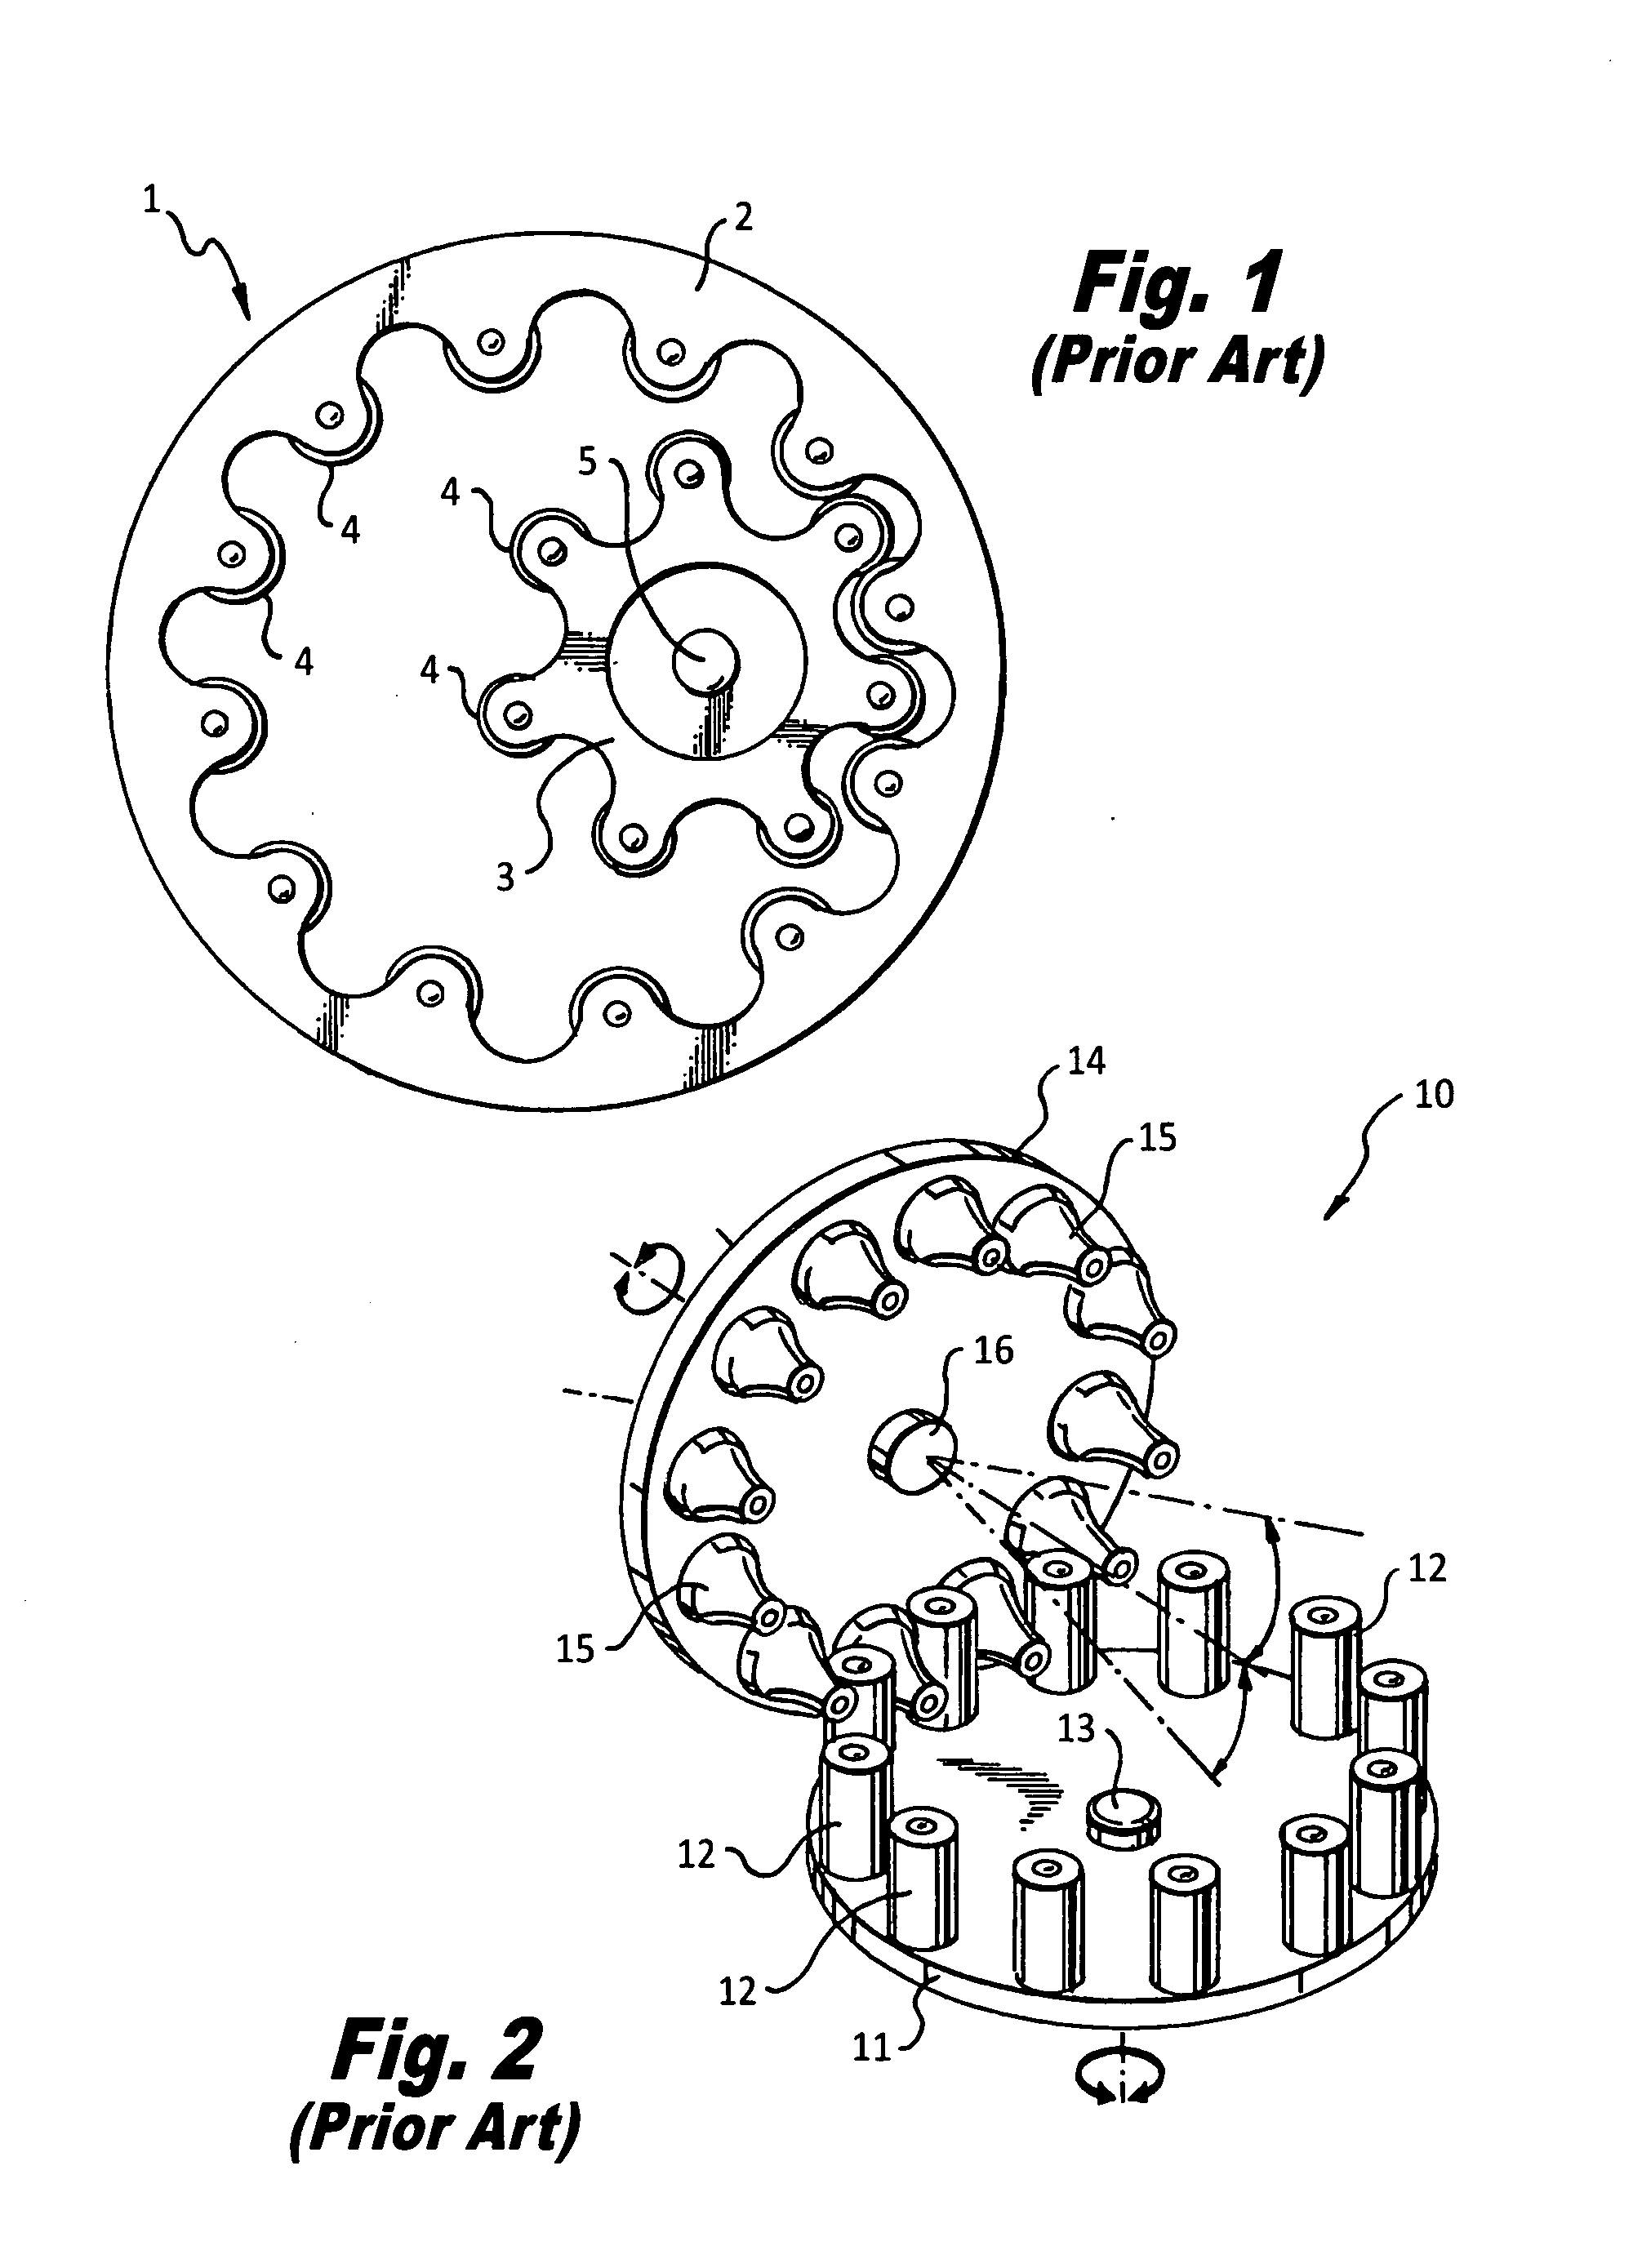 Bearing tooth gears for wind turbine applications